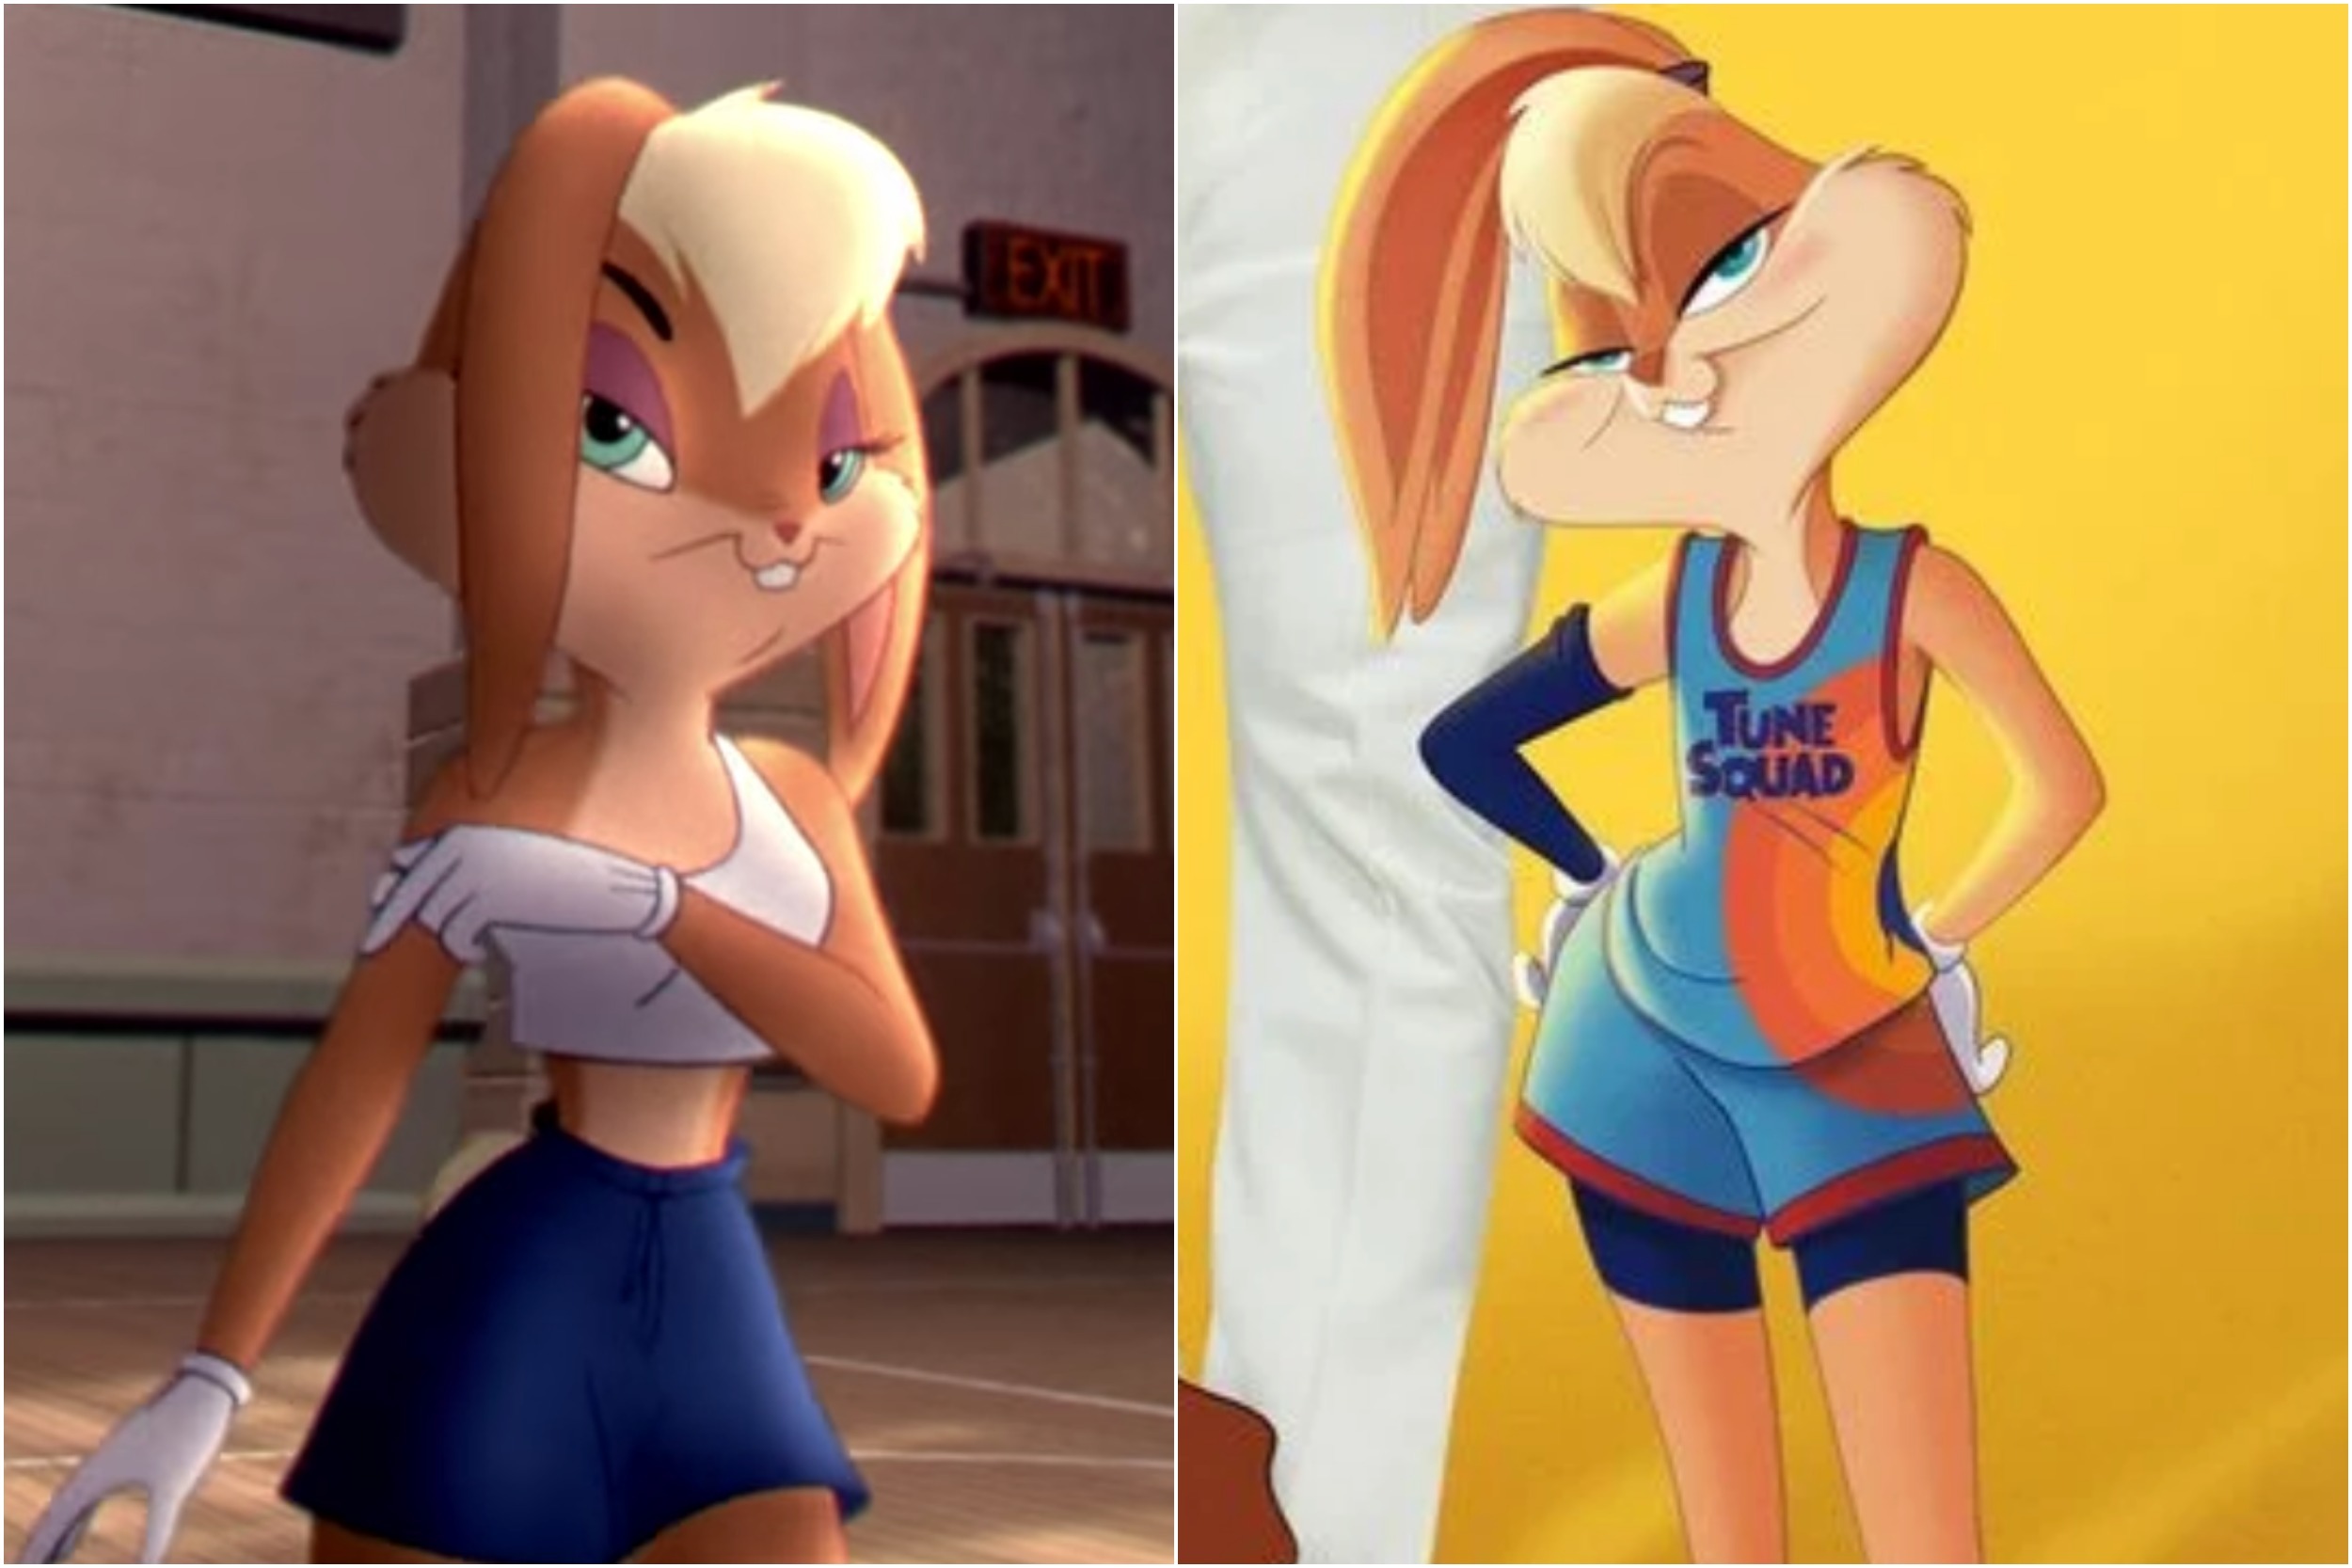 Lola Bunny's desexualized "Space Jam 2" redesign sparks inte...